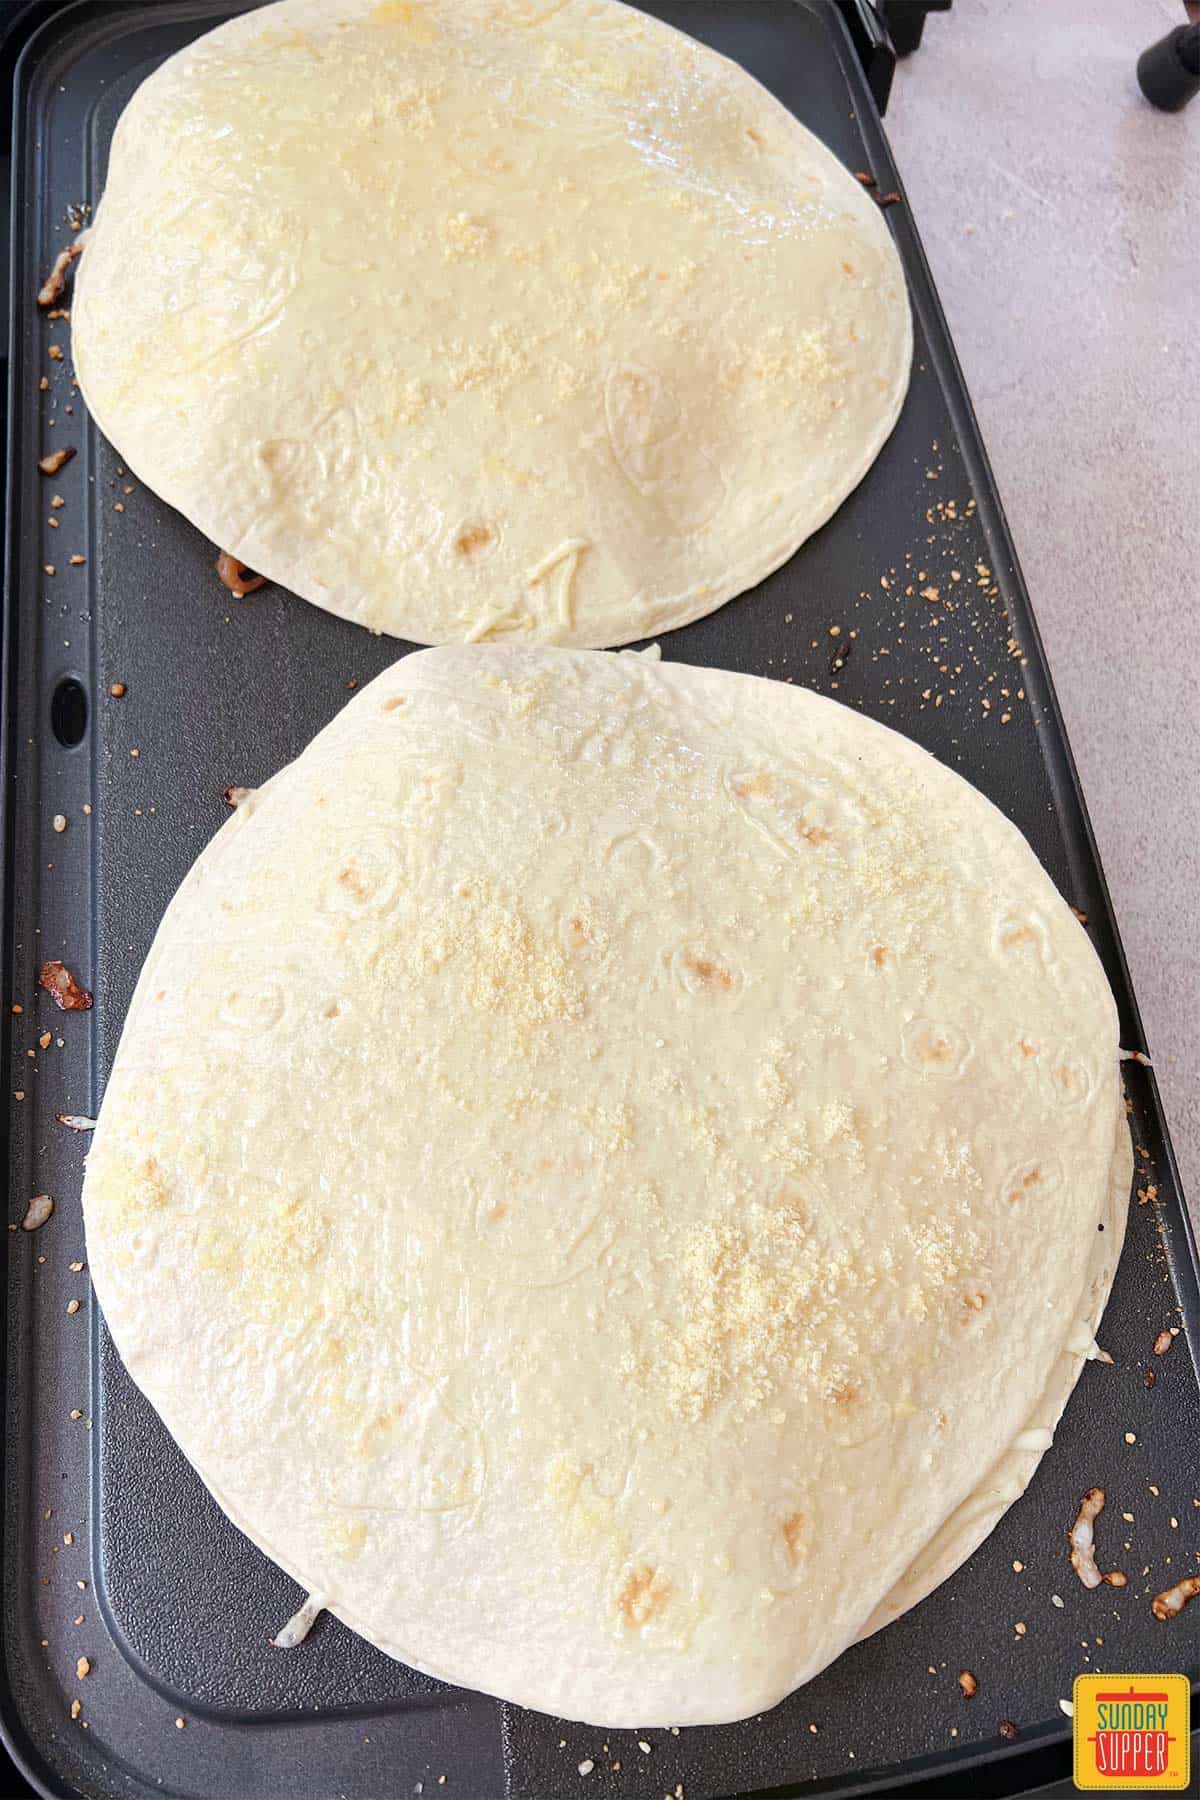 covering quesadilla with second tortilla